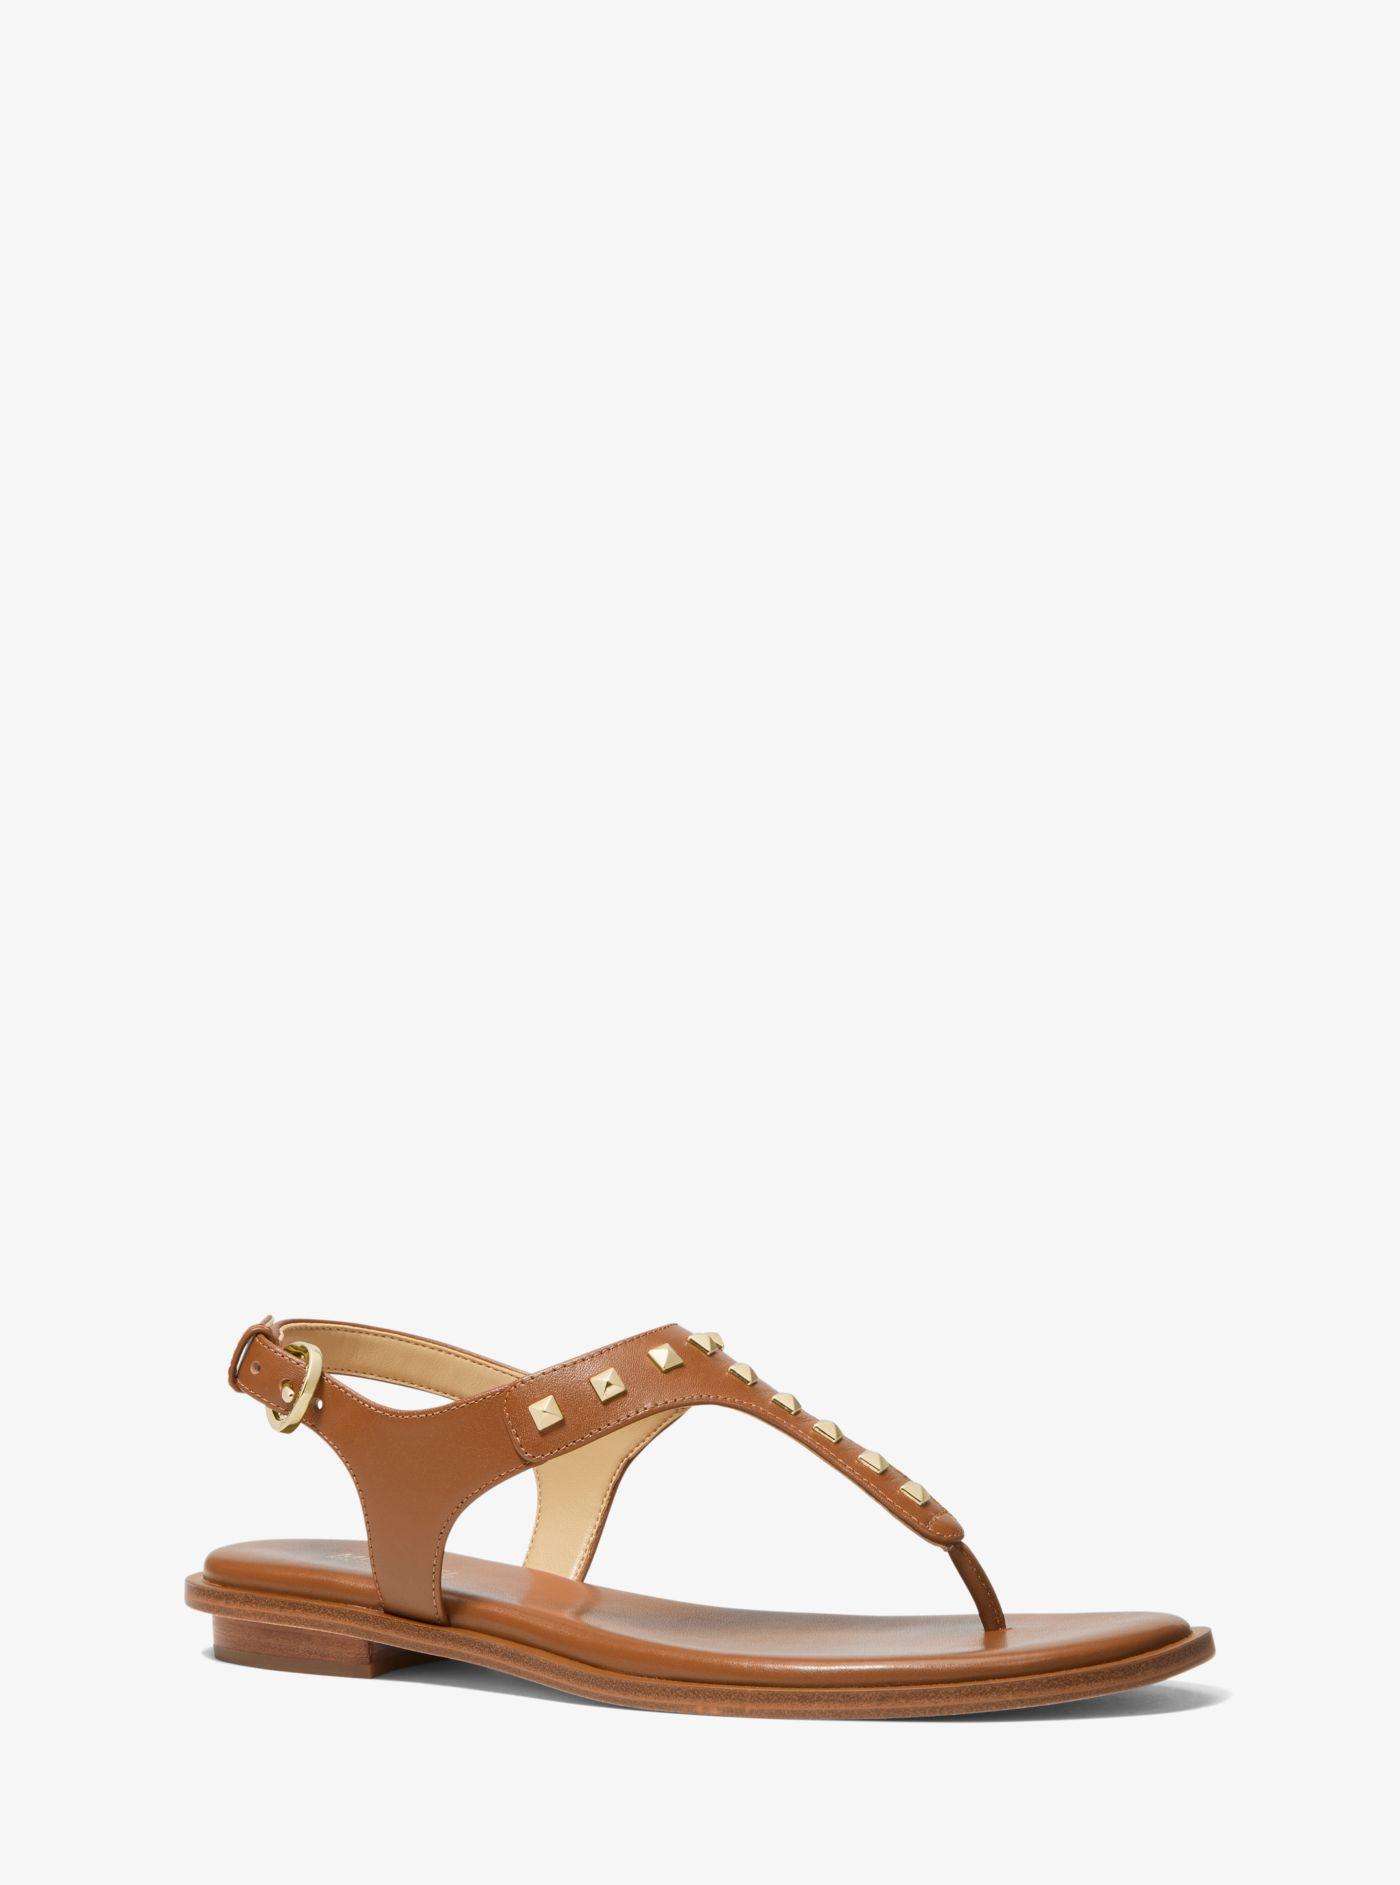 Michael Kors Niko Studded Leather Sandal in Brown - Lyst